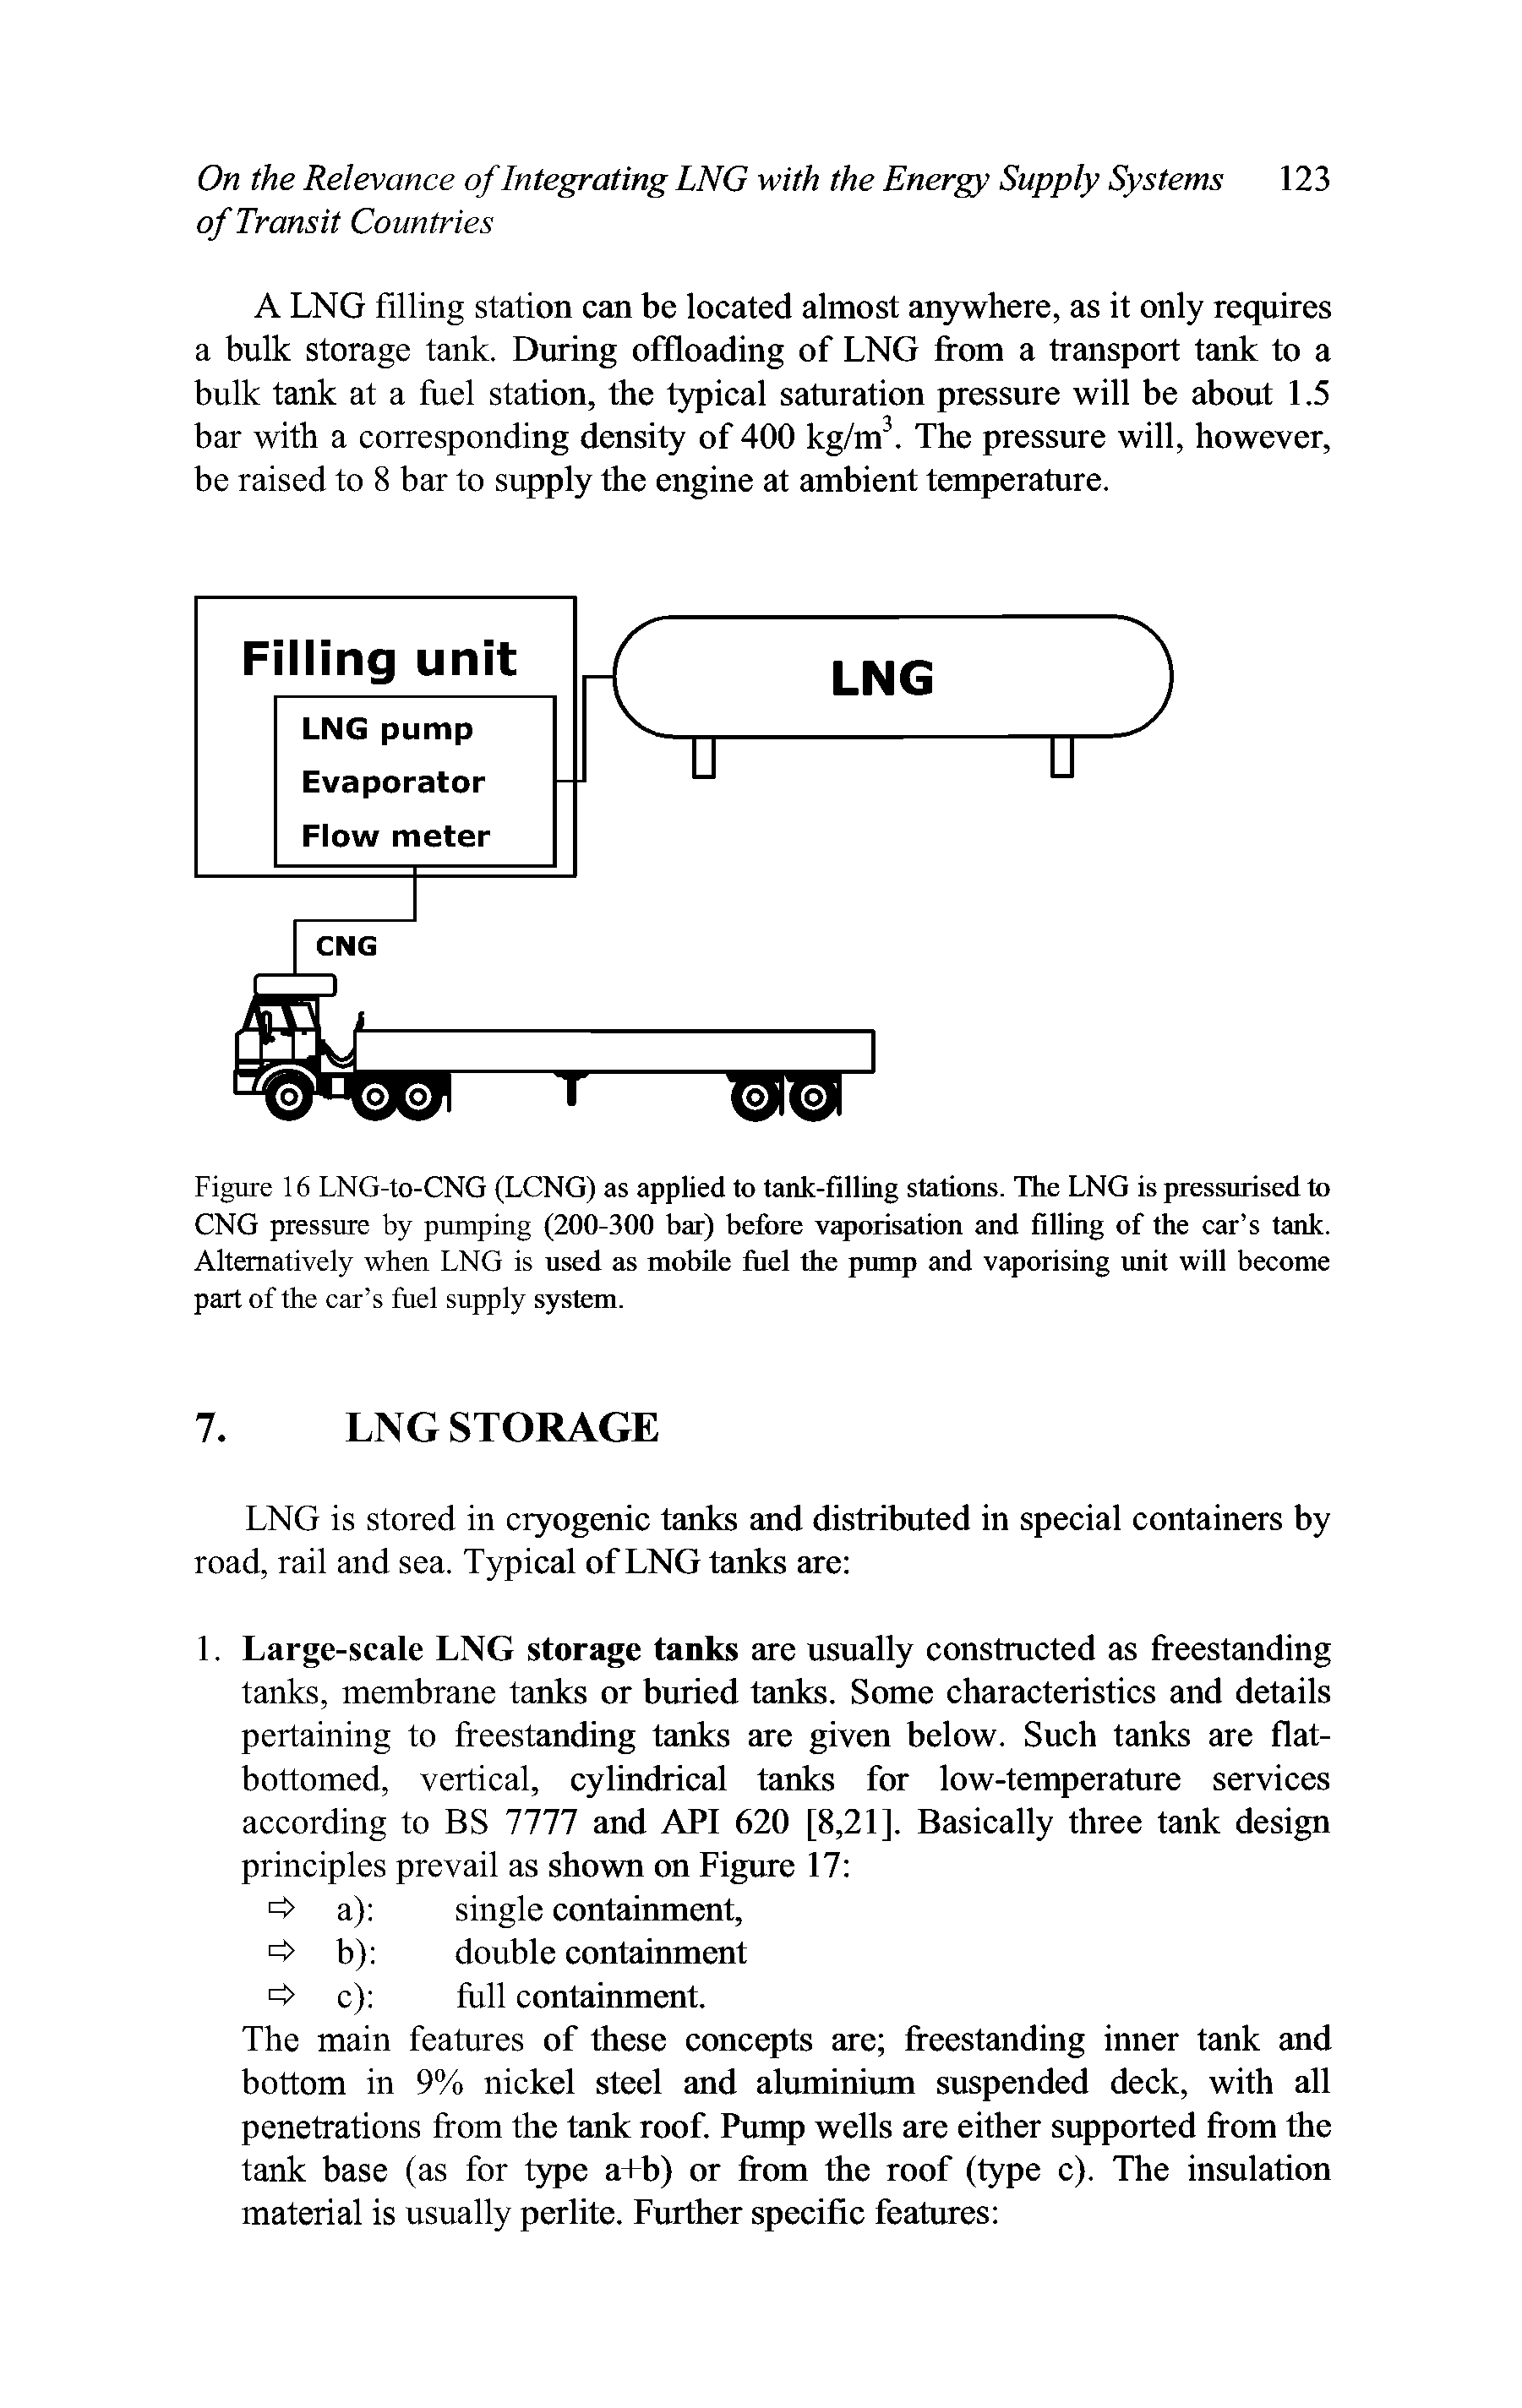 Figure 16 LNG-to-CNG (LCNG) as applied to tank-filling stations. The LNG is pressurised to CNG pressure by pumping (200-300 bar) before vaporisation and filling of the car s tank. Alternatively when LNG is used as mobile fuel the pump and vaporising unit will become part of the car s fuel supply system.